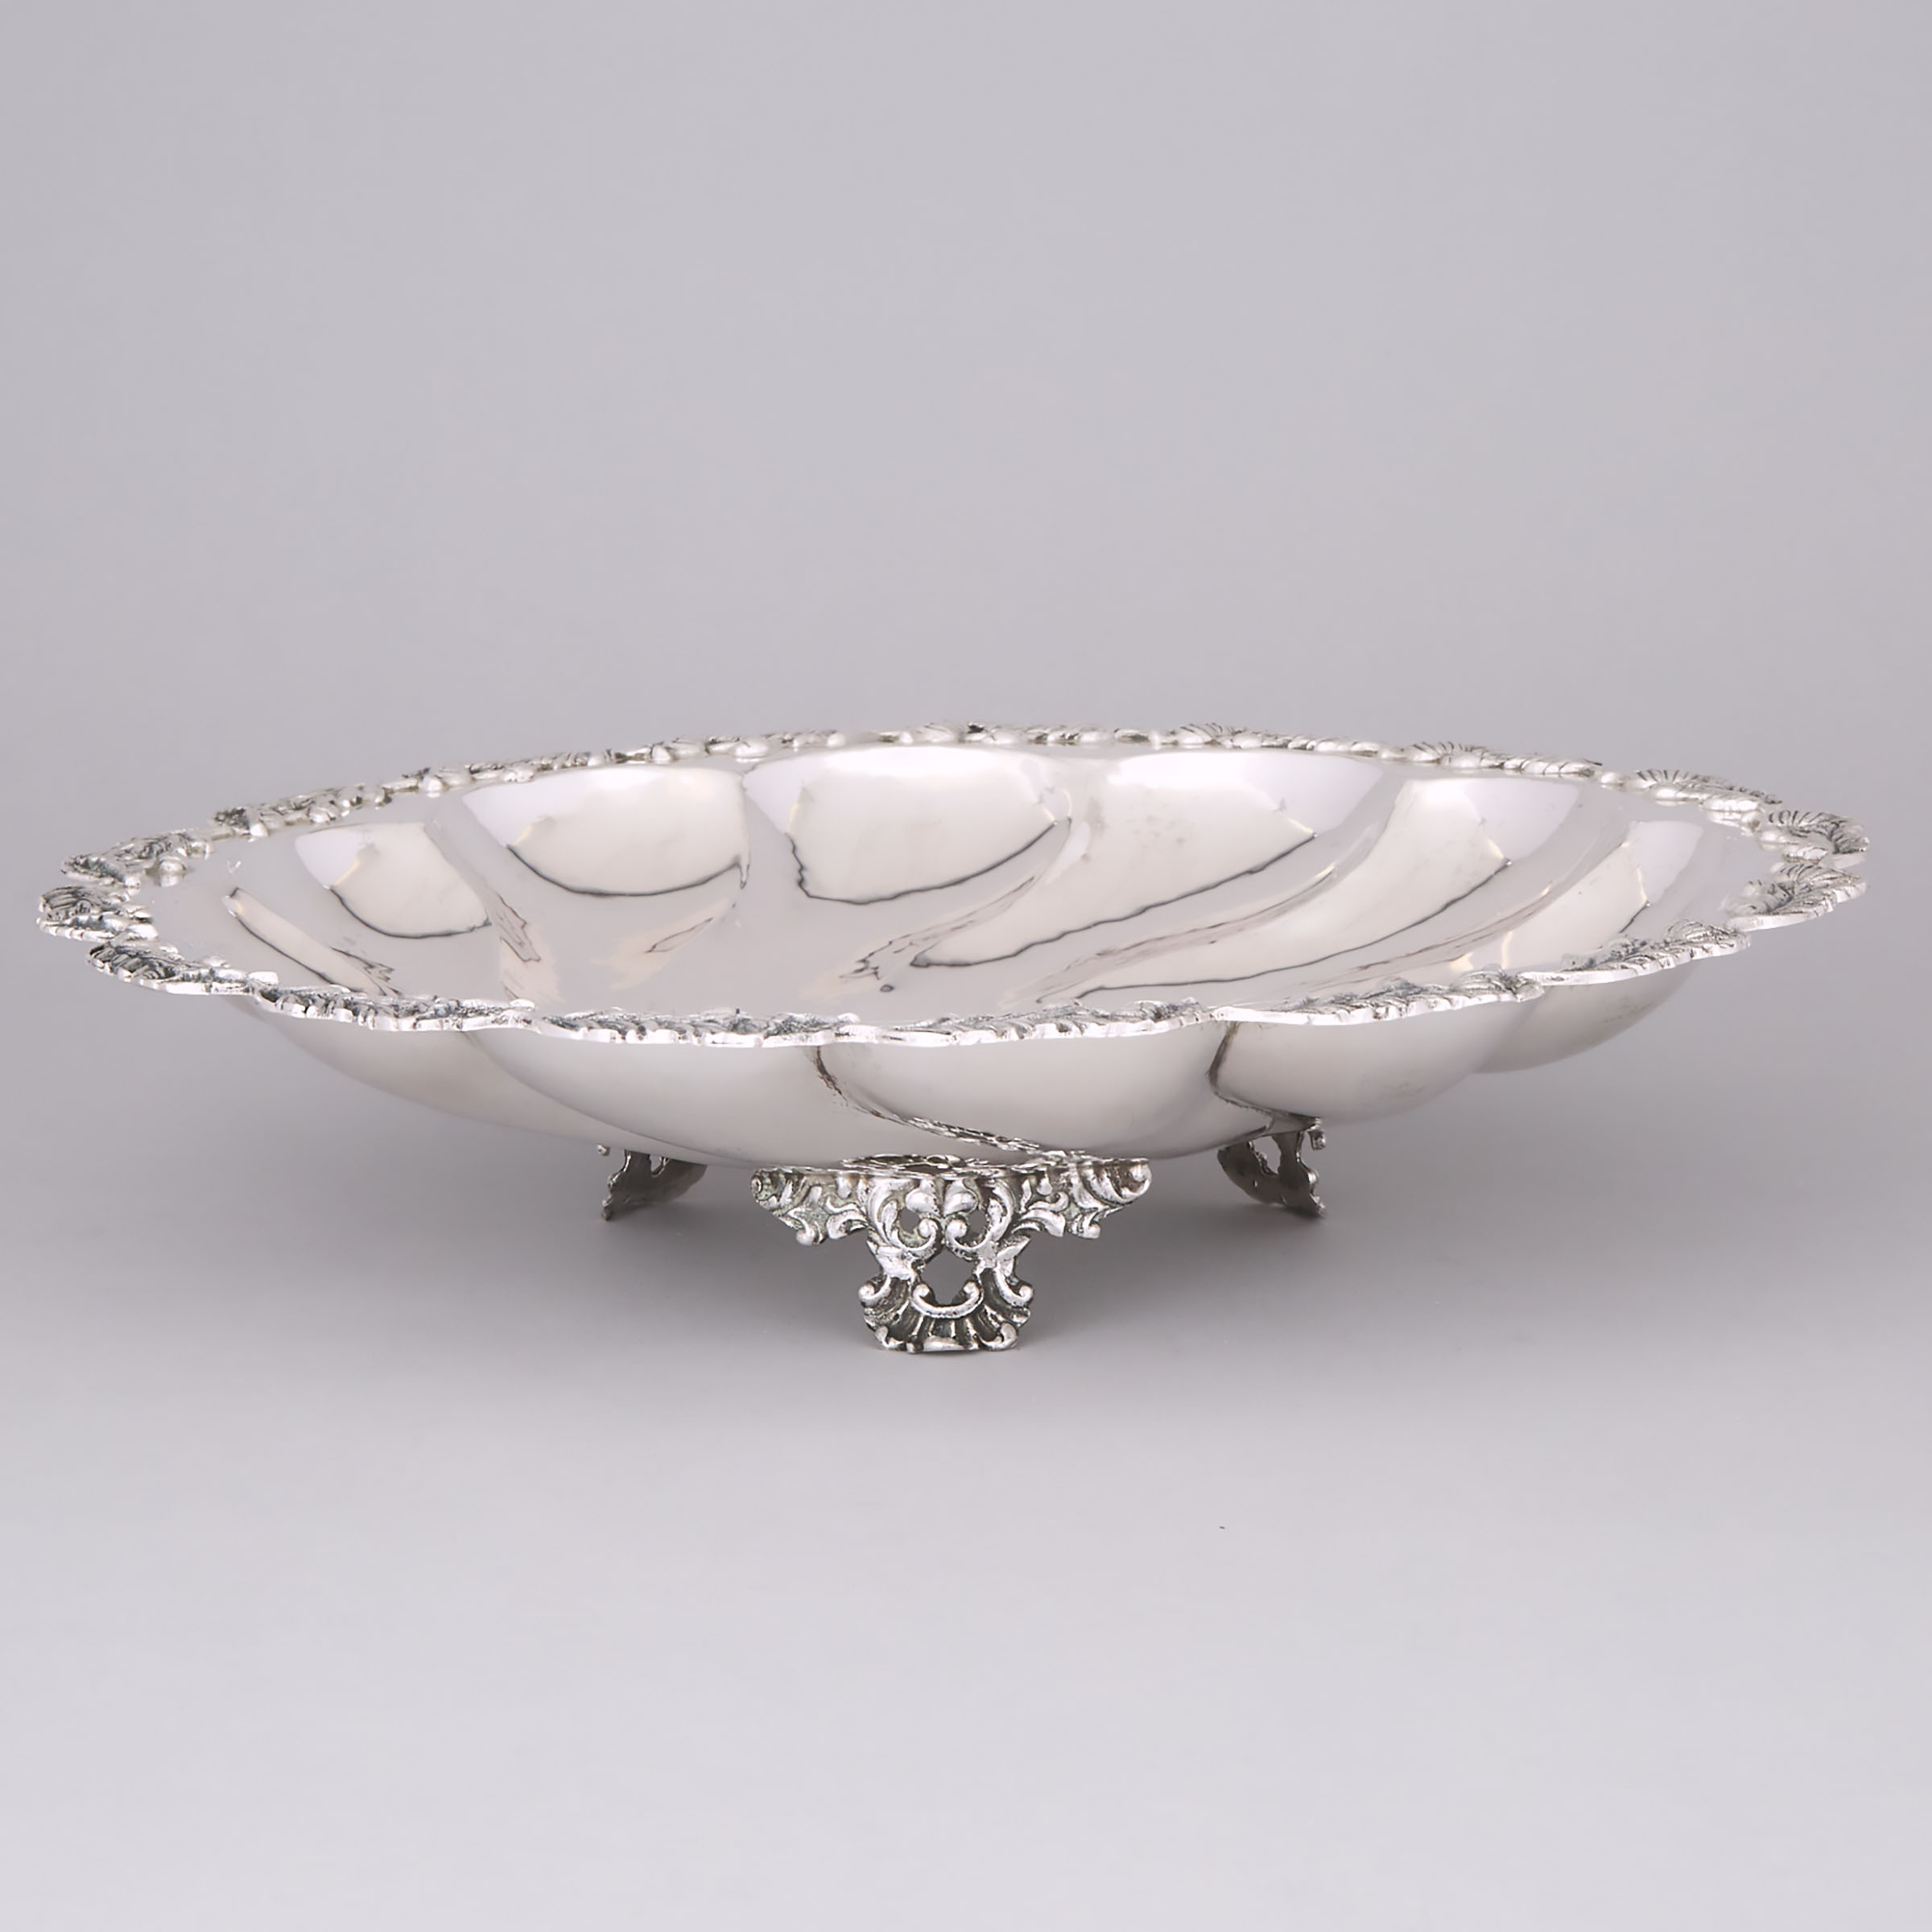 Middle-Eastern Silver Shallow Bowl, 20th century